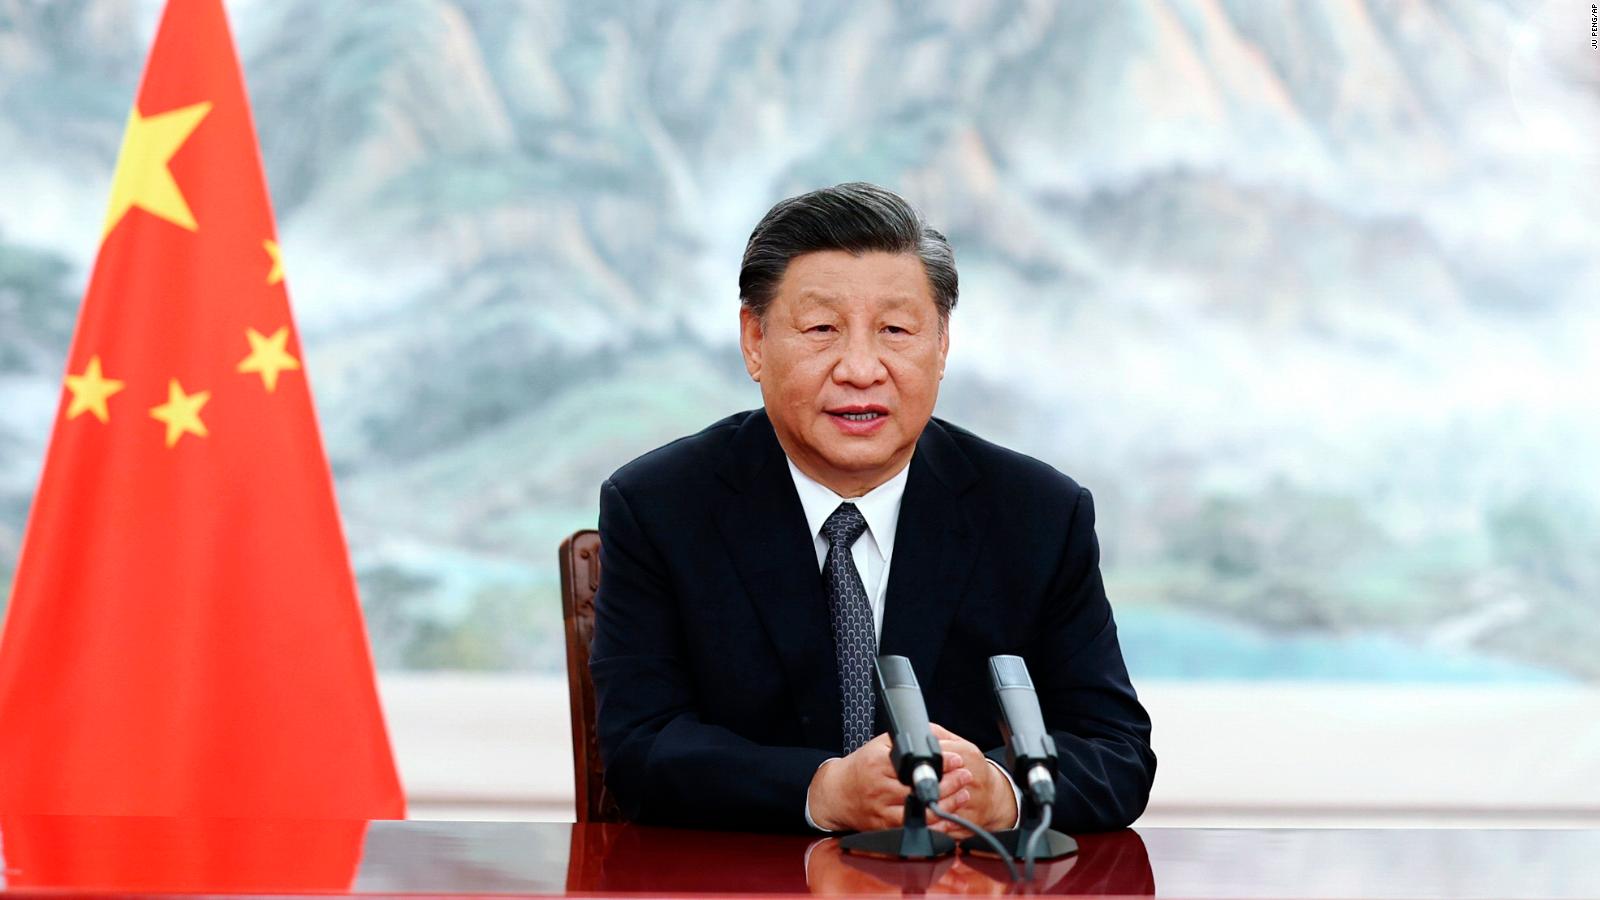 Western sanctions are ‘weaponizing’ world economy, China’s Xi Jinping says ahead of BRICS summit￼